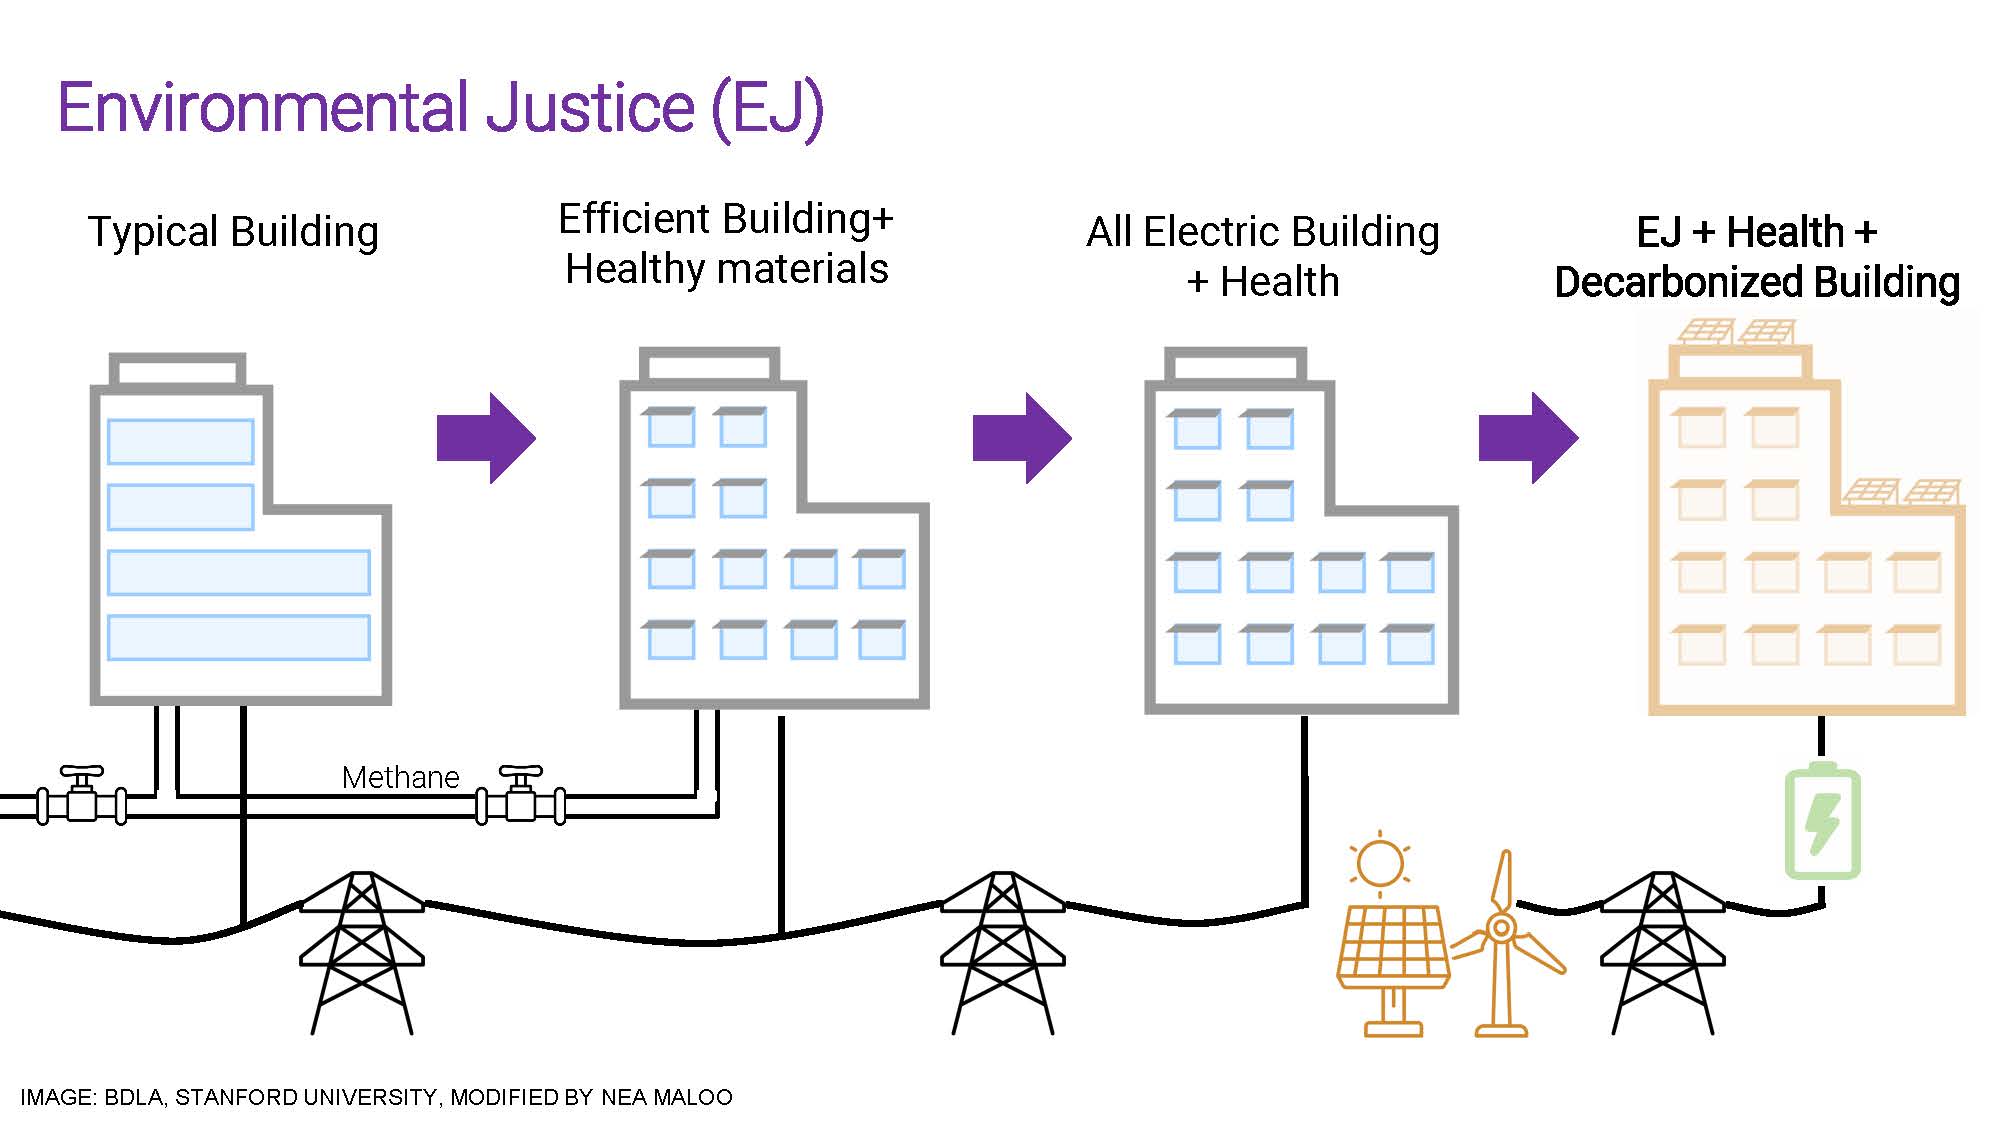 A diagram of four drawn buildings, escalating from "Typical Building" to "EJ+Health+Decarbonized Building"